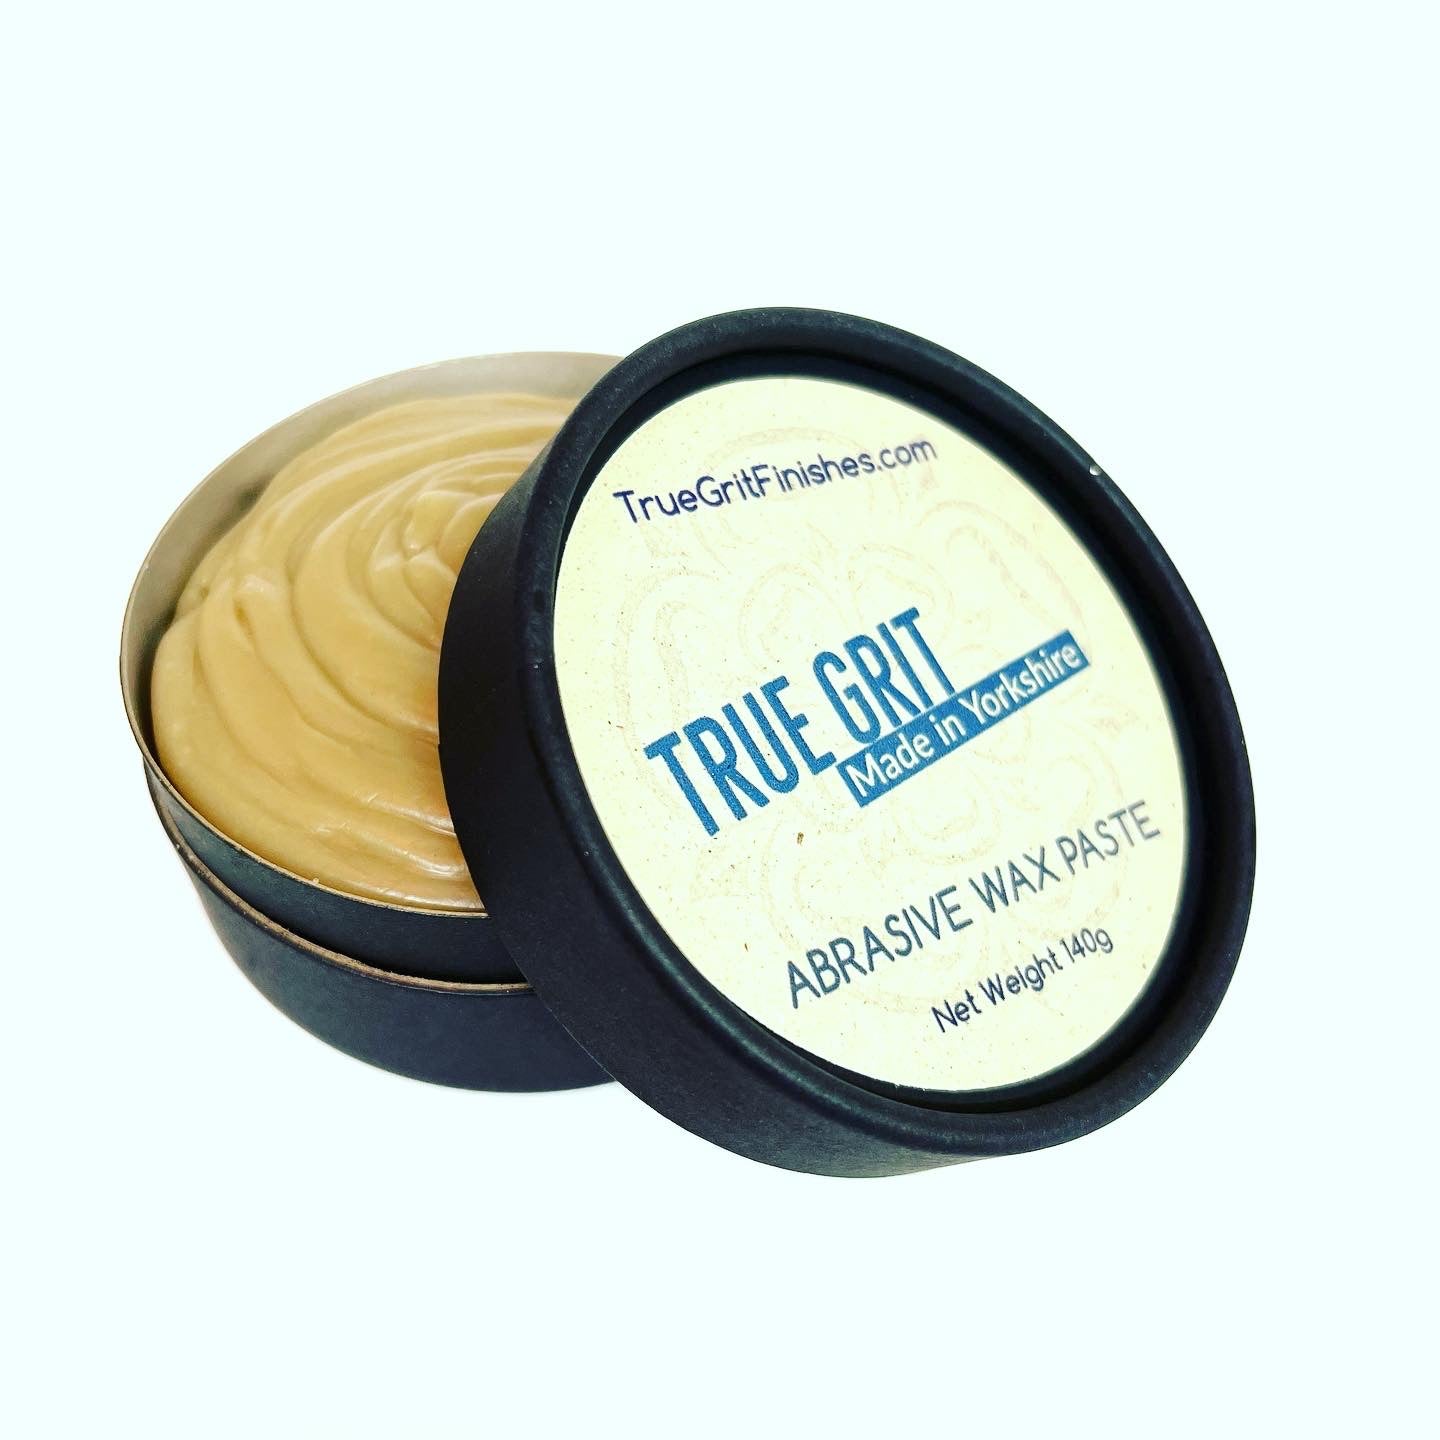 True Grit Woodturners Abrasive Paste | Made in Yorkshire | Abrasive Wax Paste